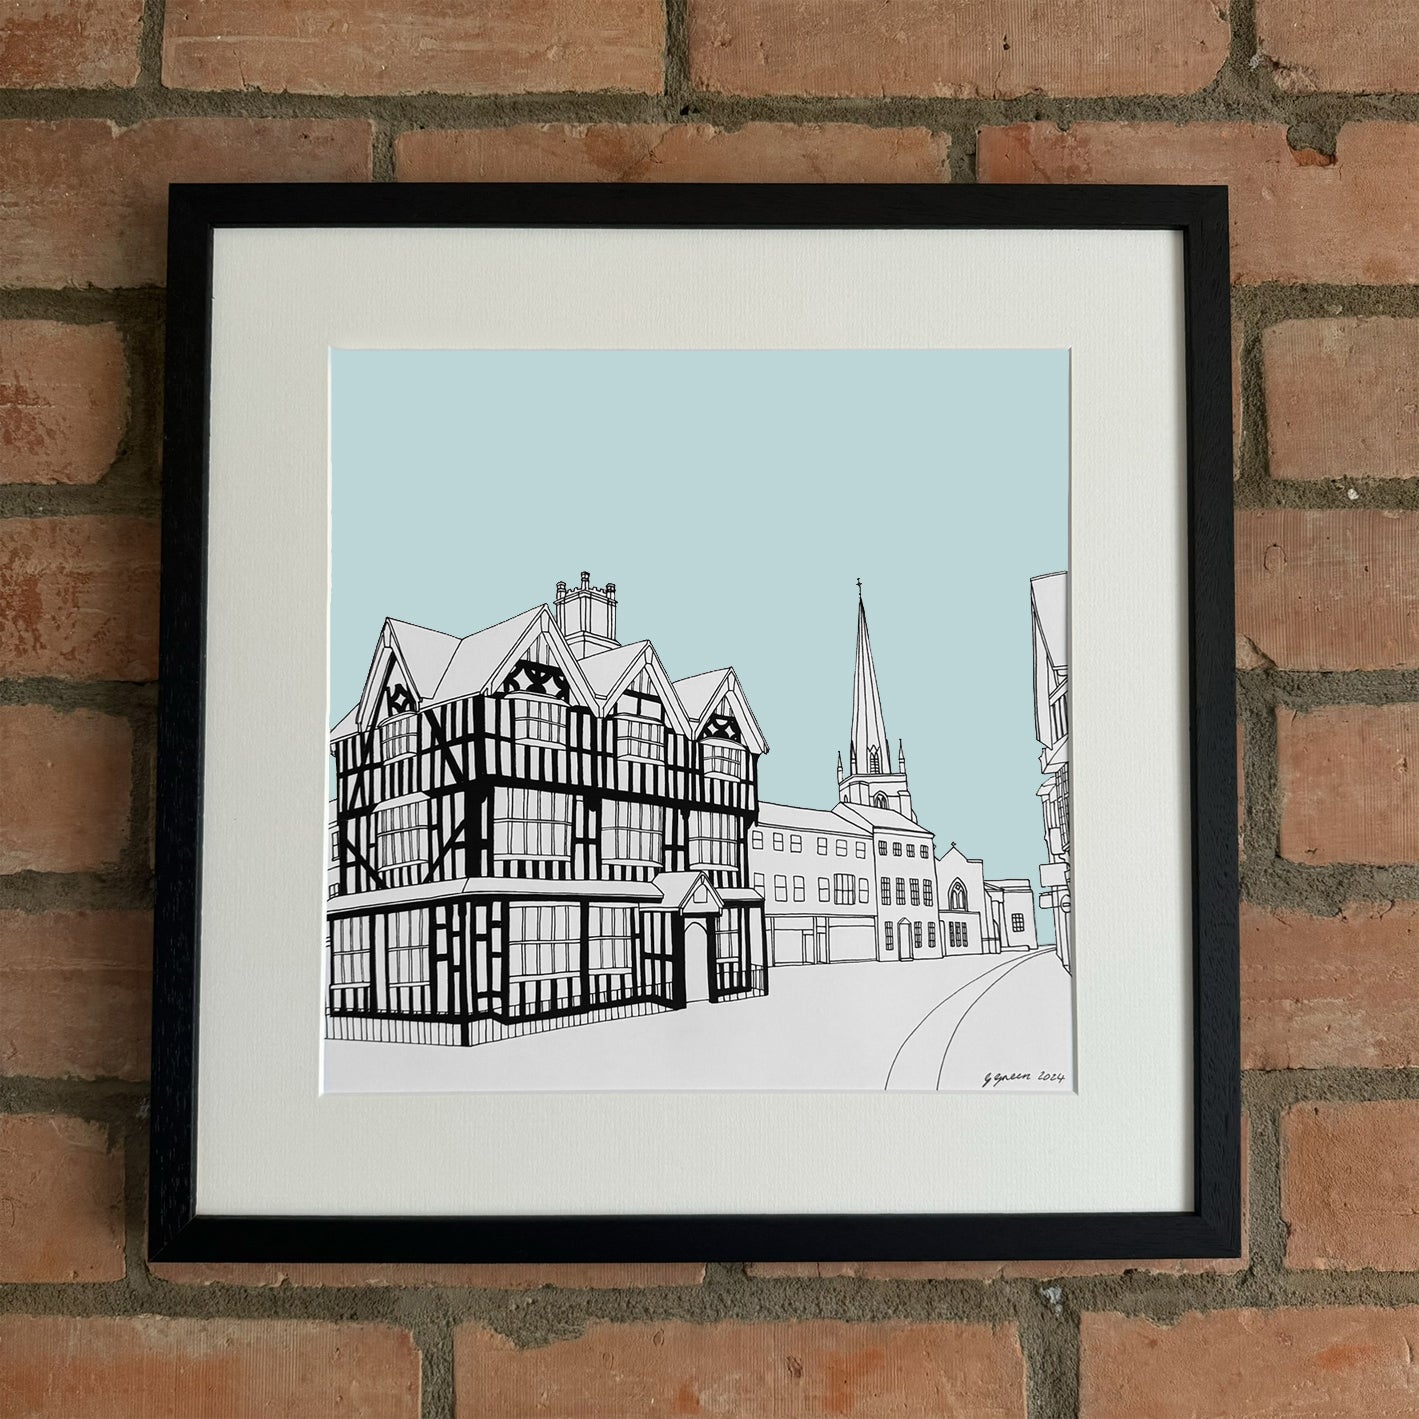 Hereford Giclee Print 30cm x 30cm (Limited Edition)